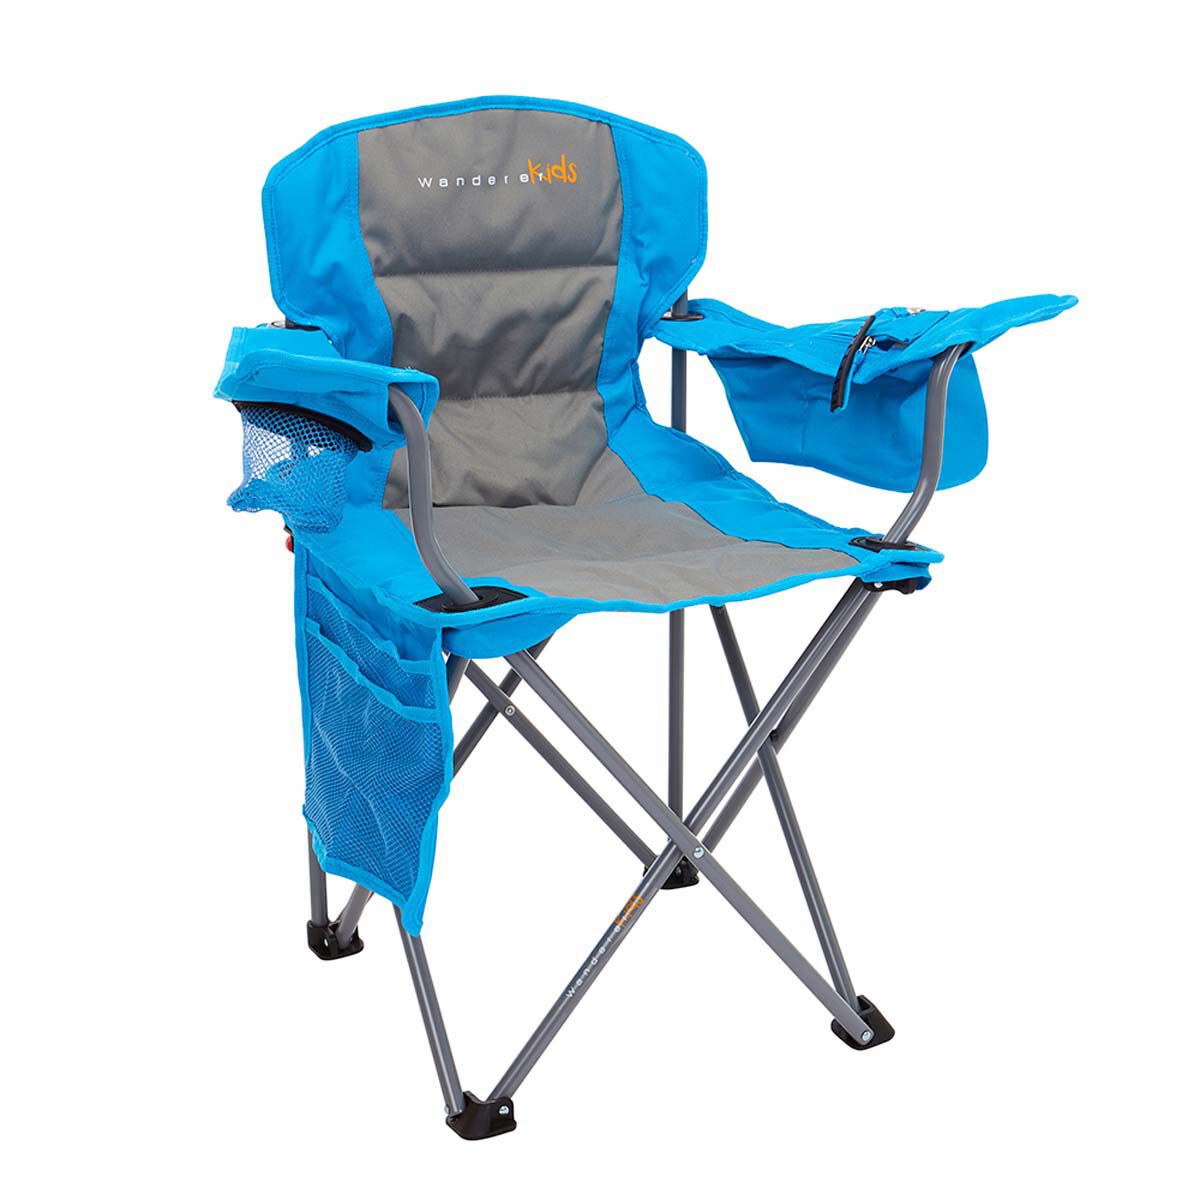 Kids Camping Chairs & Baby Camping High Chairs Australia